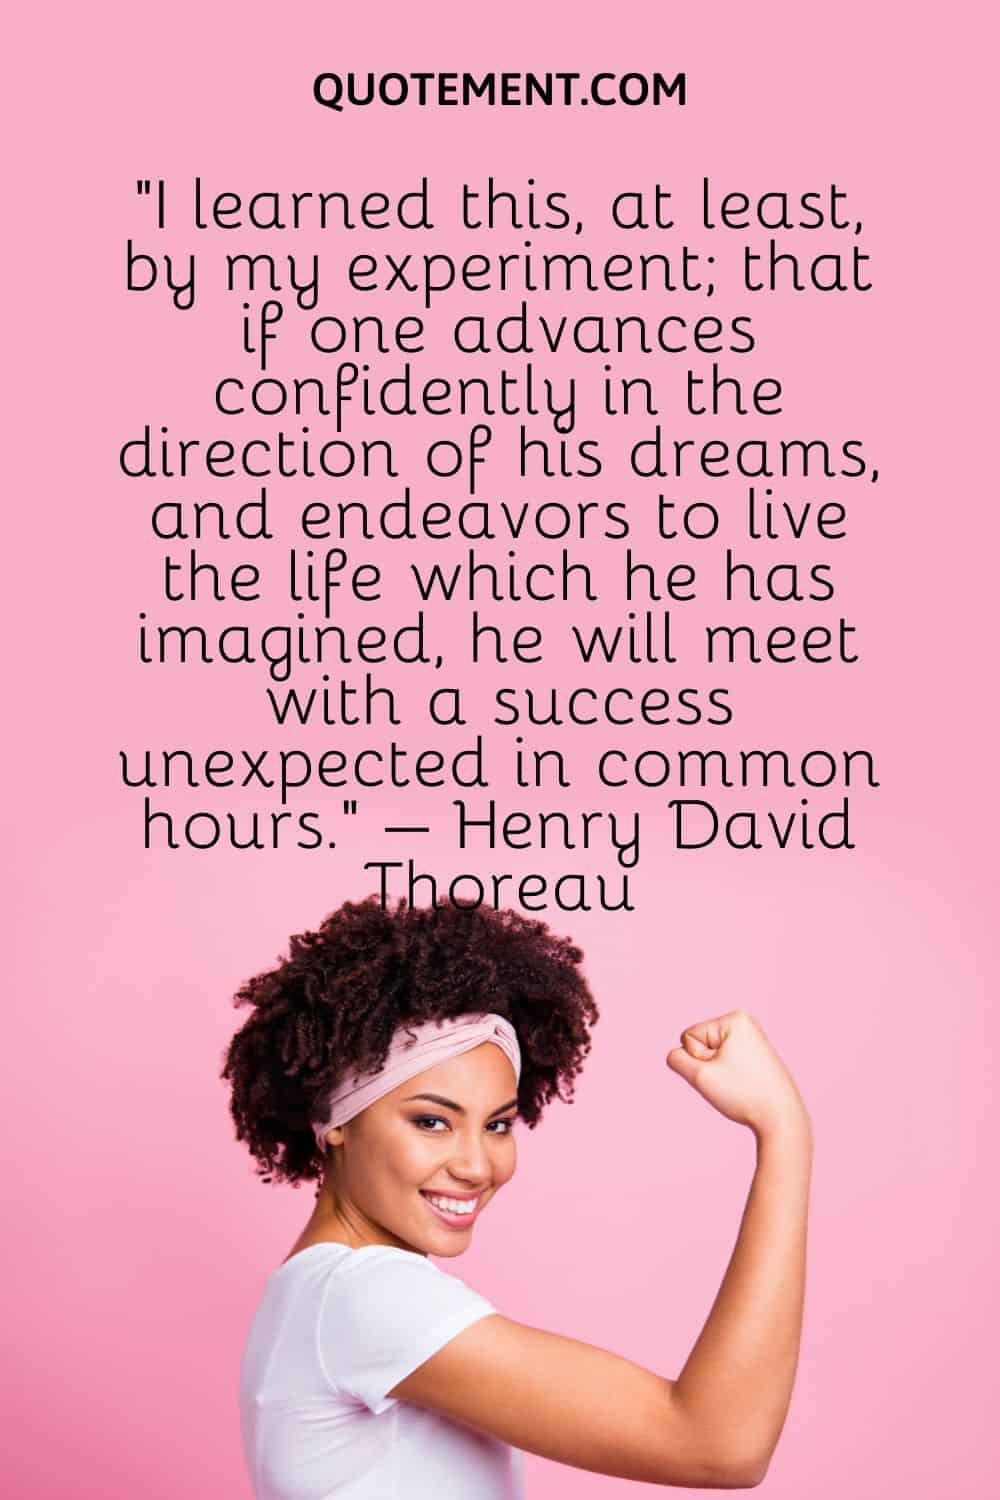 if one advances confidently in the direction of his dreams, and endeavors to live the life which he has imagined, he will meet with a success unexpected in common hours